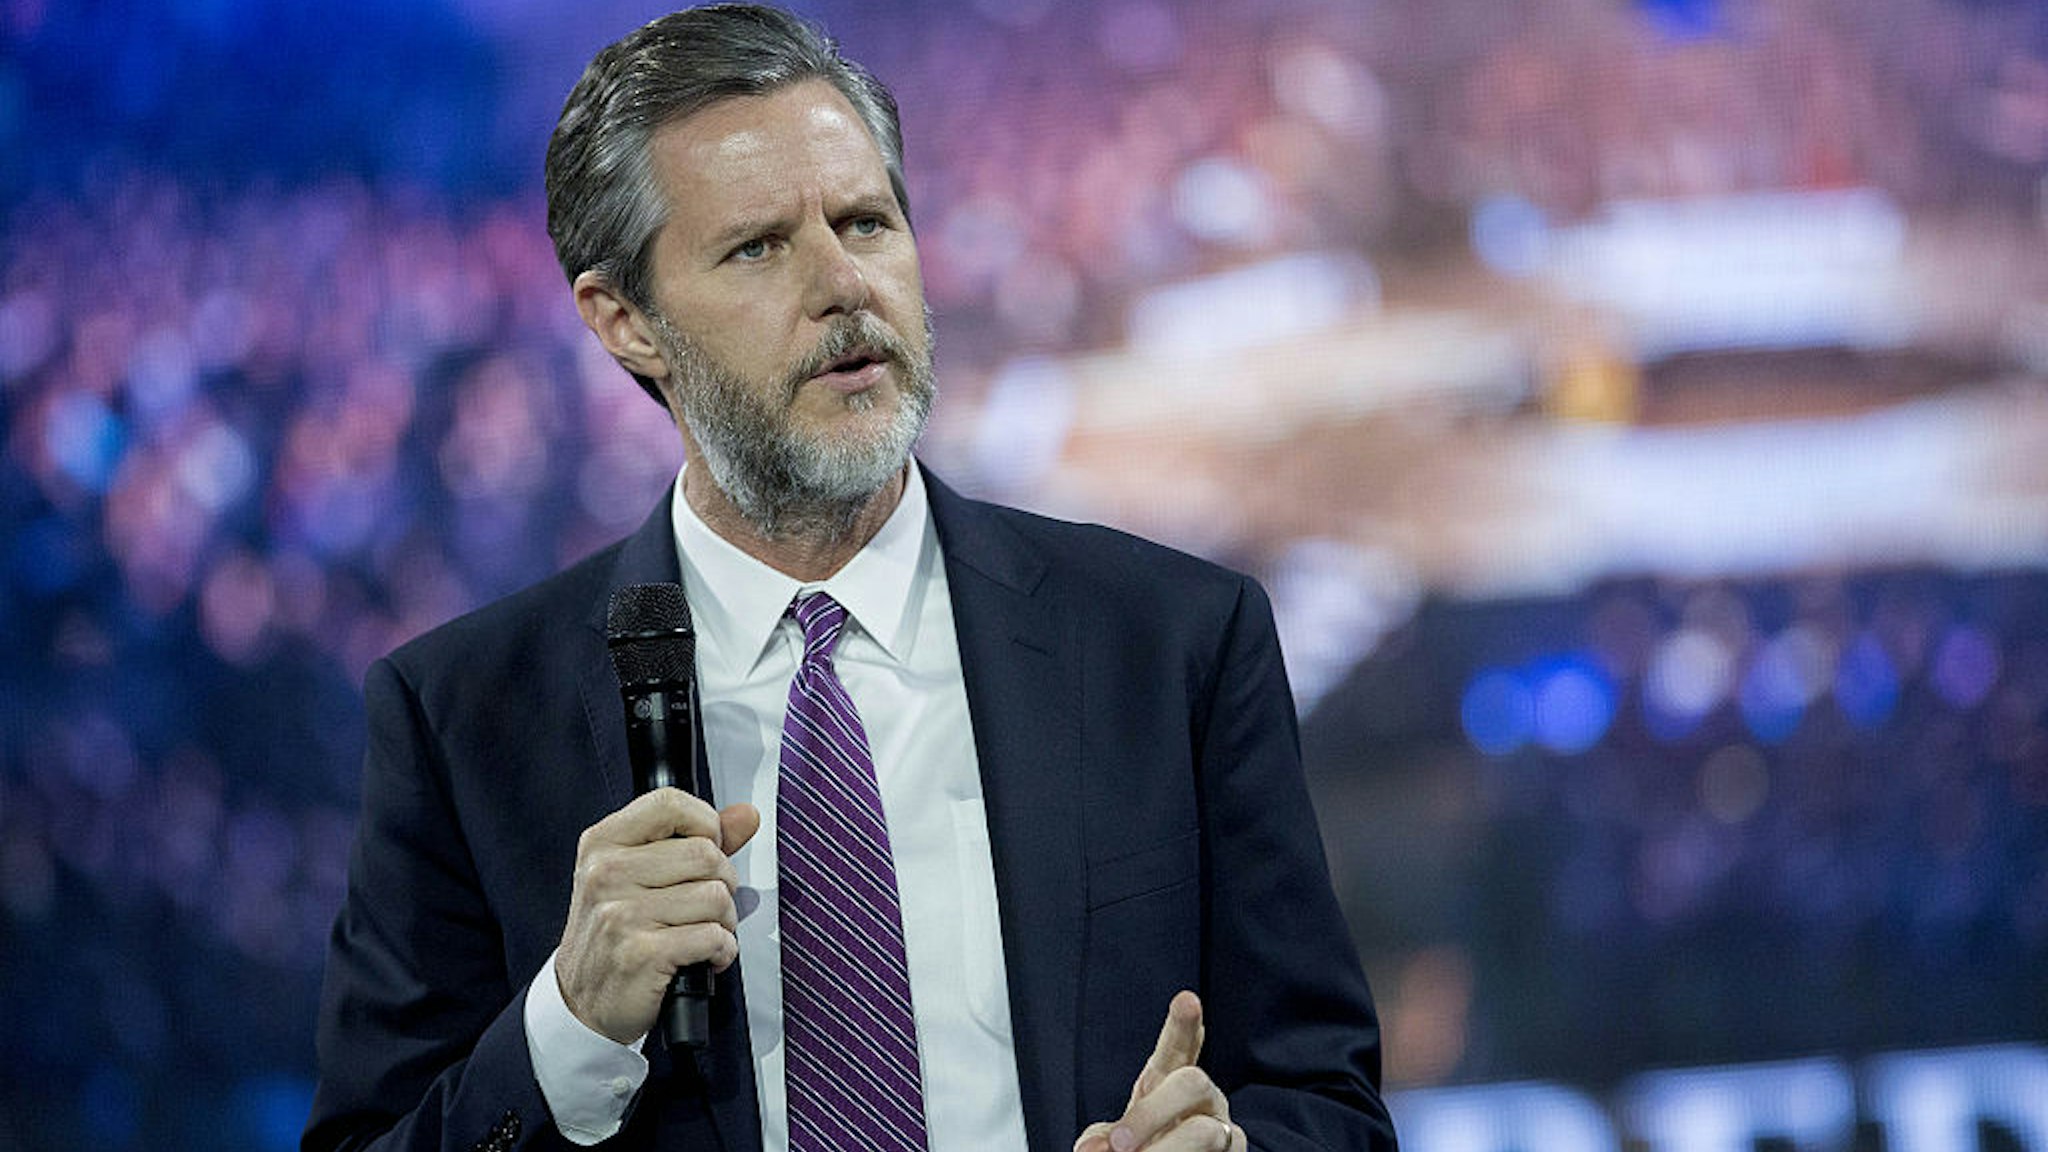 Jerry Falwell Jr., president of Liberty University, speaks during a Liberty University Convocation with Ben Carson, 2016 Republican presidential candidate, not pictured, in Lynchburg, Virginia, U.S., on Wednesday, Nov. 11, 2015.